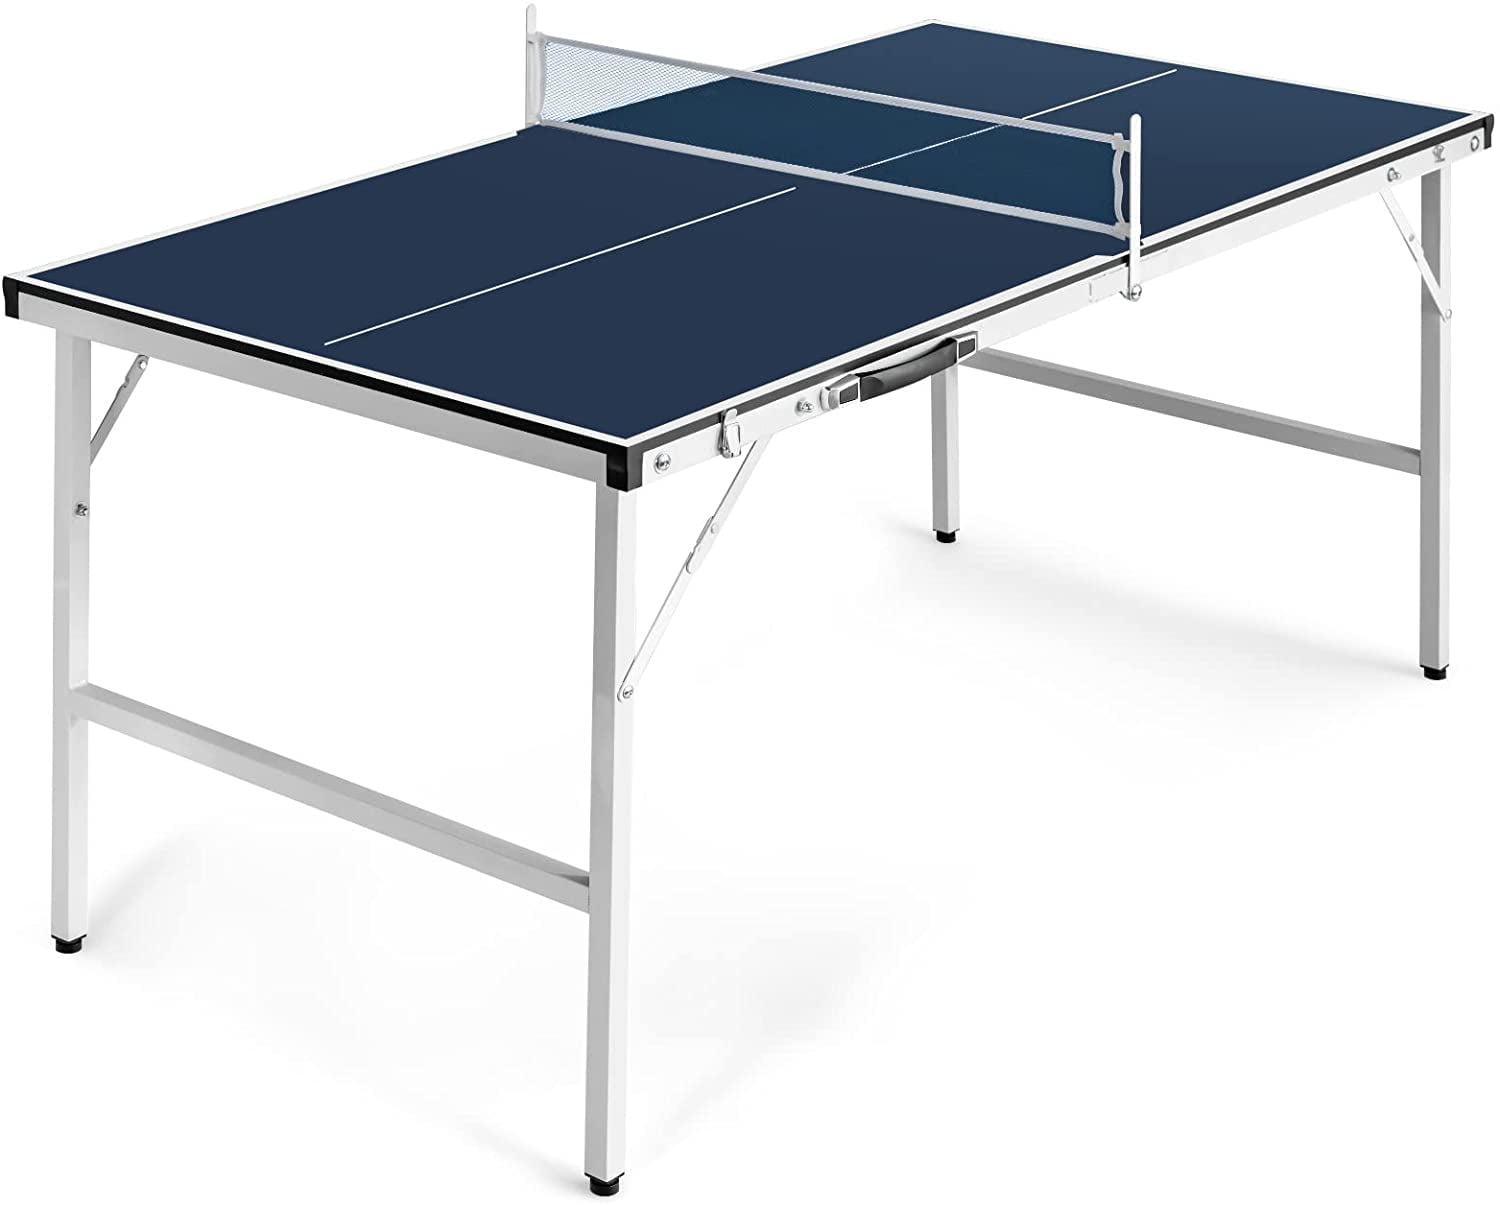 Professional Tournament Ping Pong Table Tennis Net and Clip Indoor Game D 